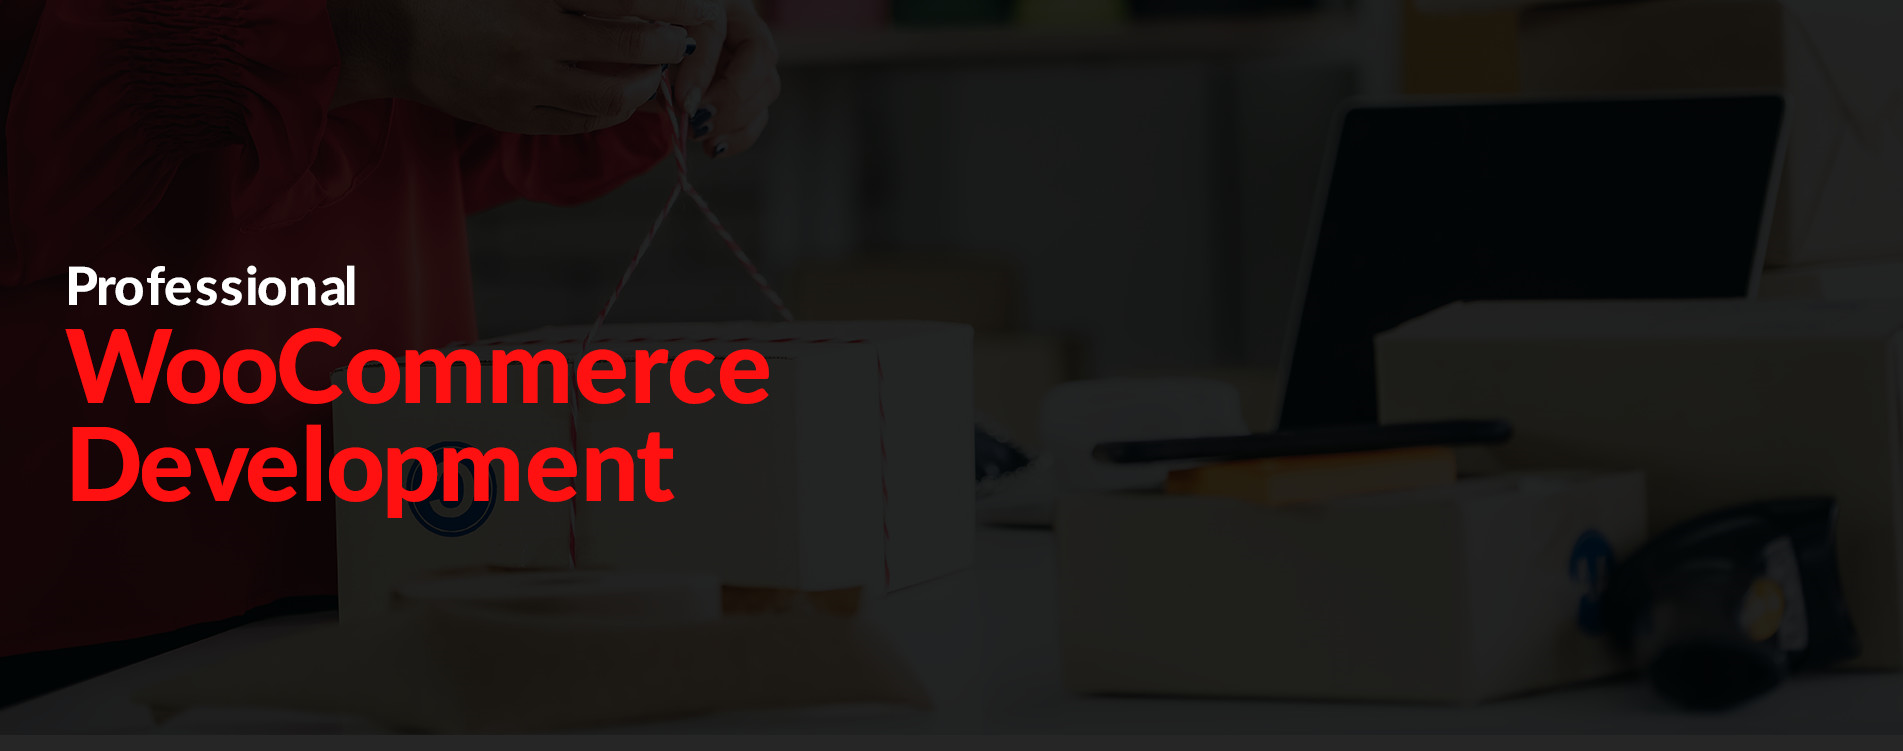 woocommerce service provider companies chicago